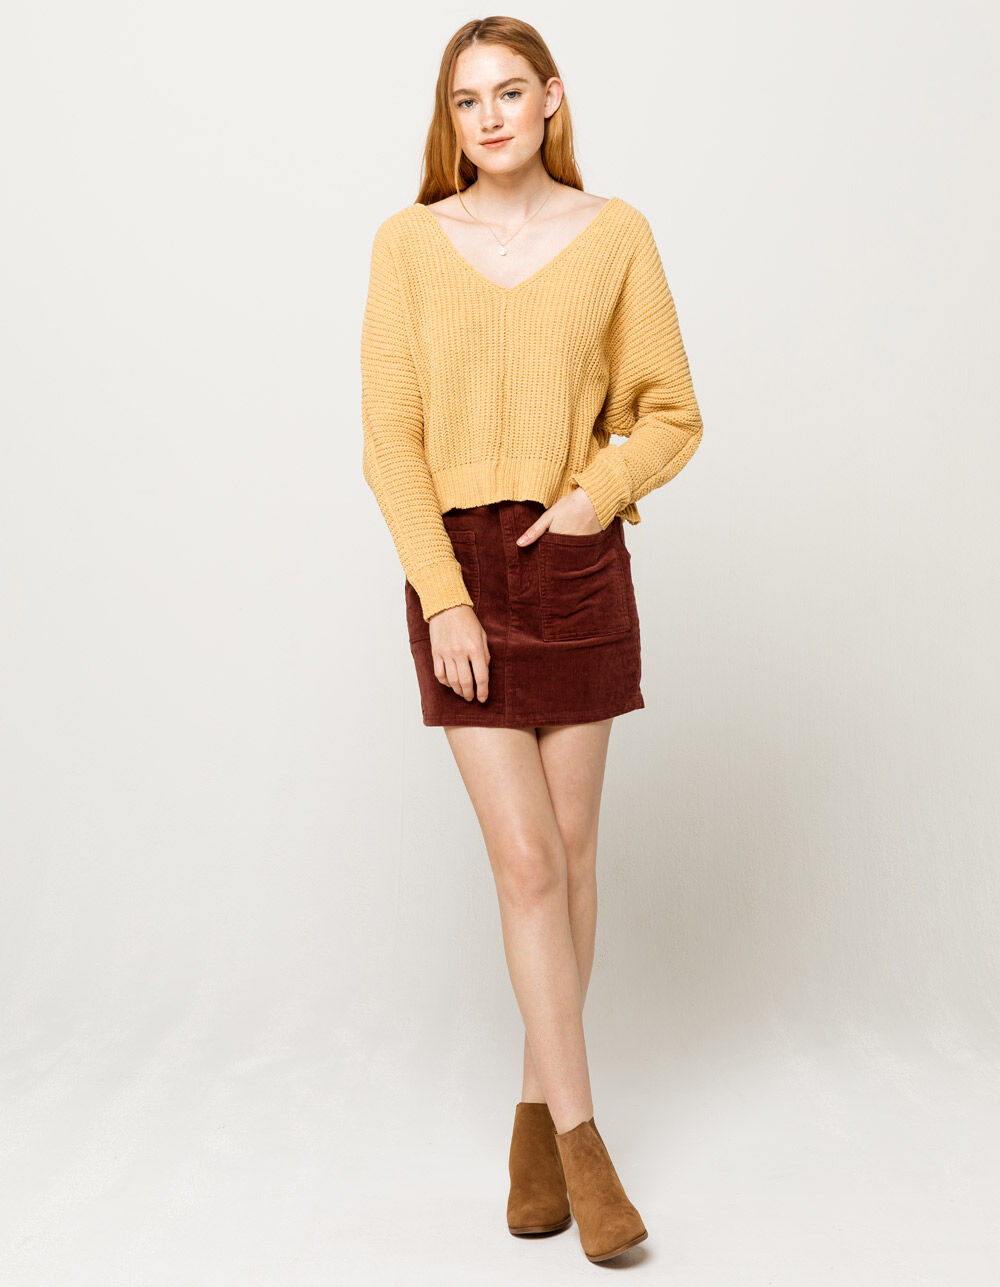 SKY AND SPARROW Matte Chenille V-Neck Yellow Womens Dolman Sweater image number 4